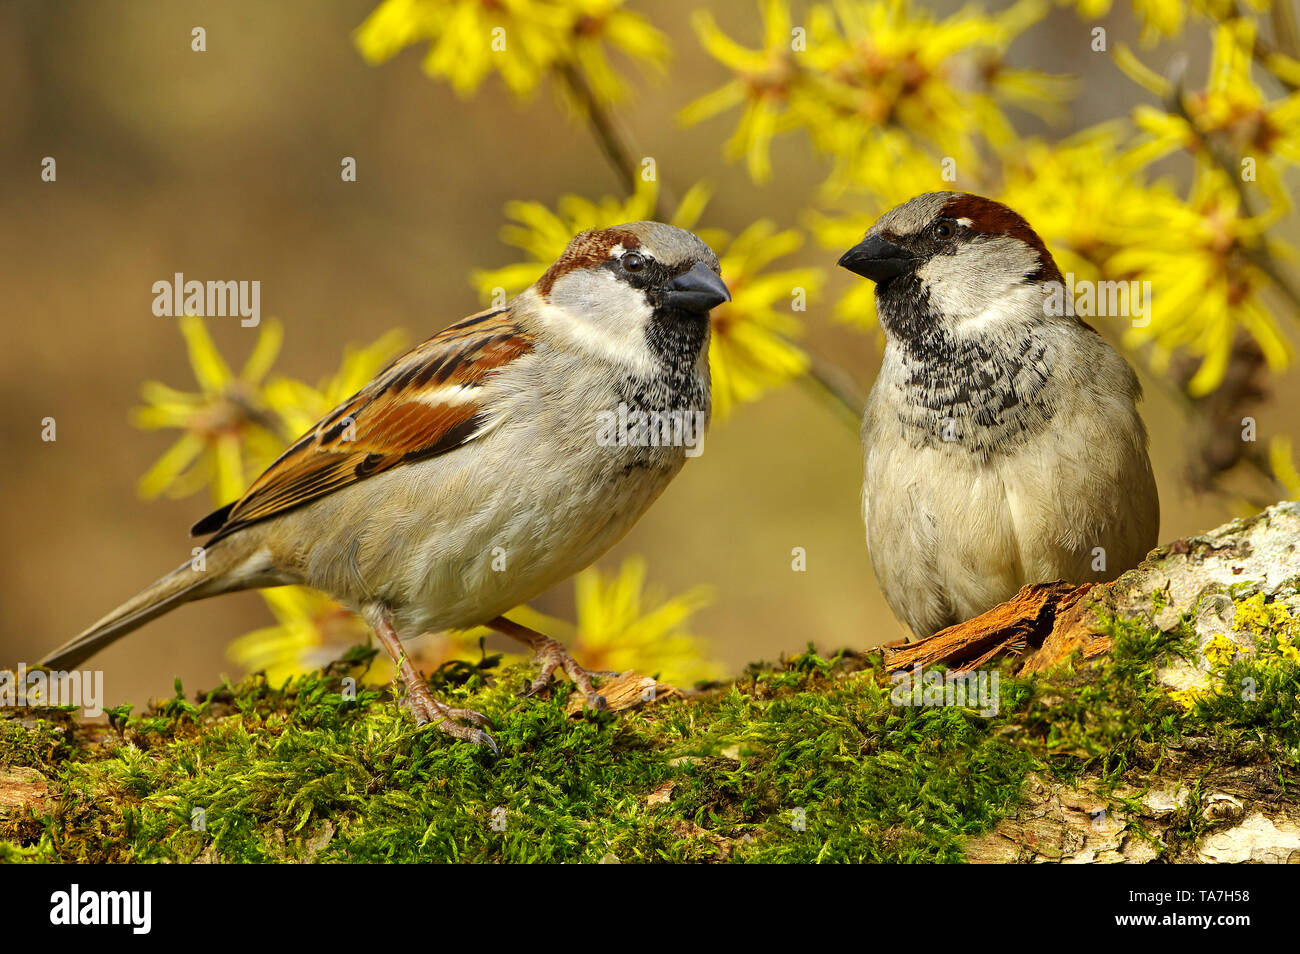 House Sparrow (Passer domesticus). Two adult males perched on a twig, with flowering Witch Hazel in background. Germany Stock Photo